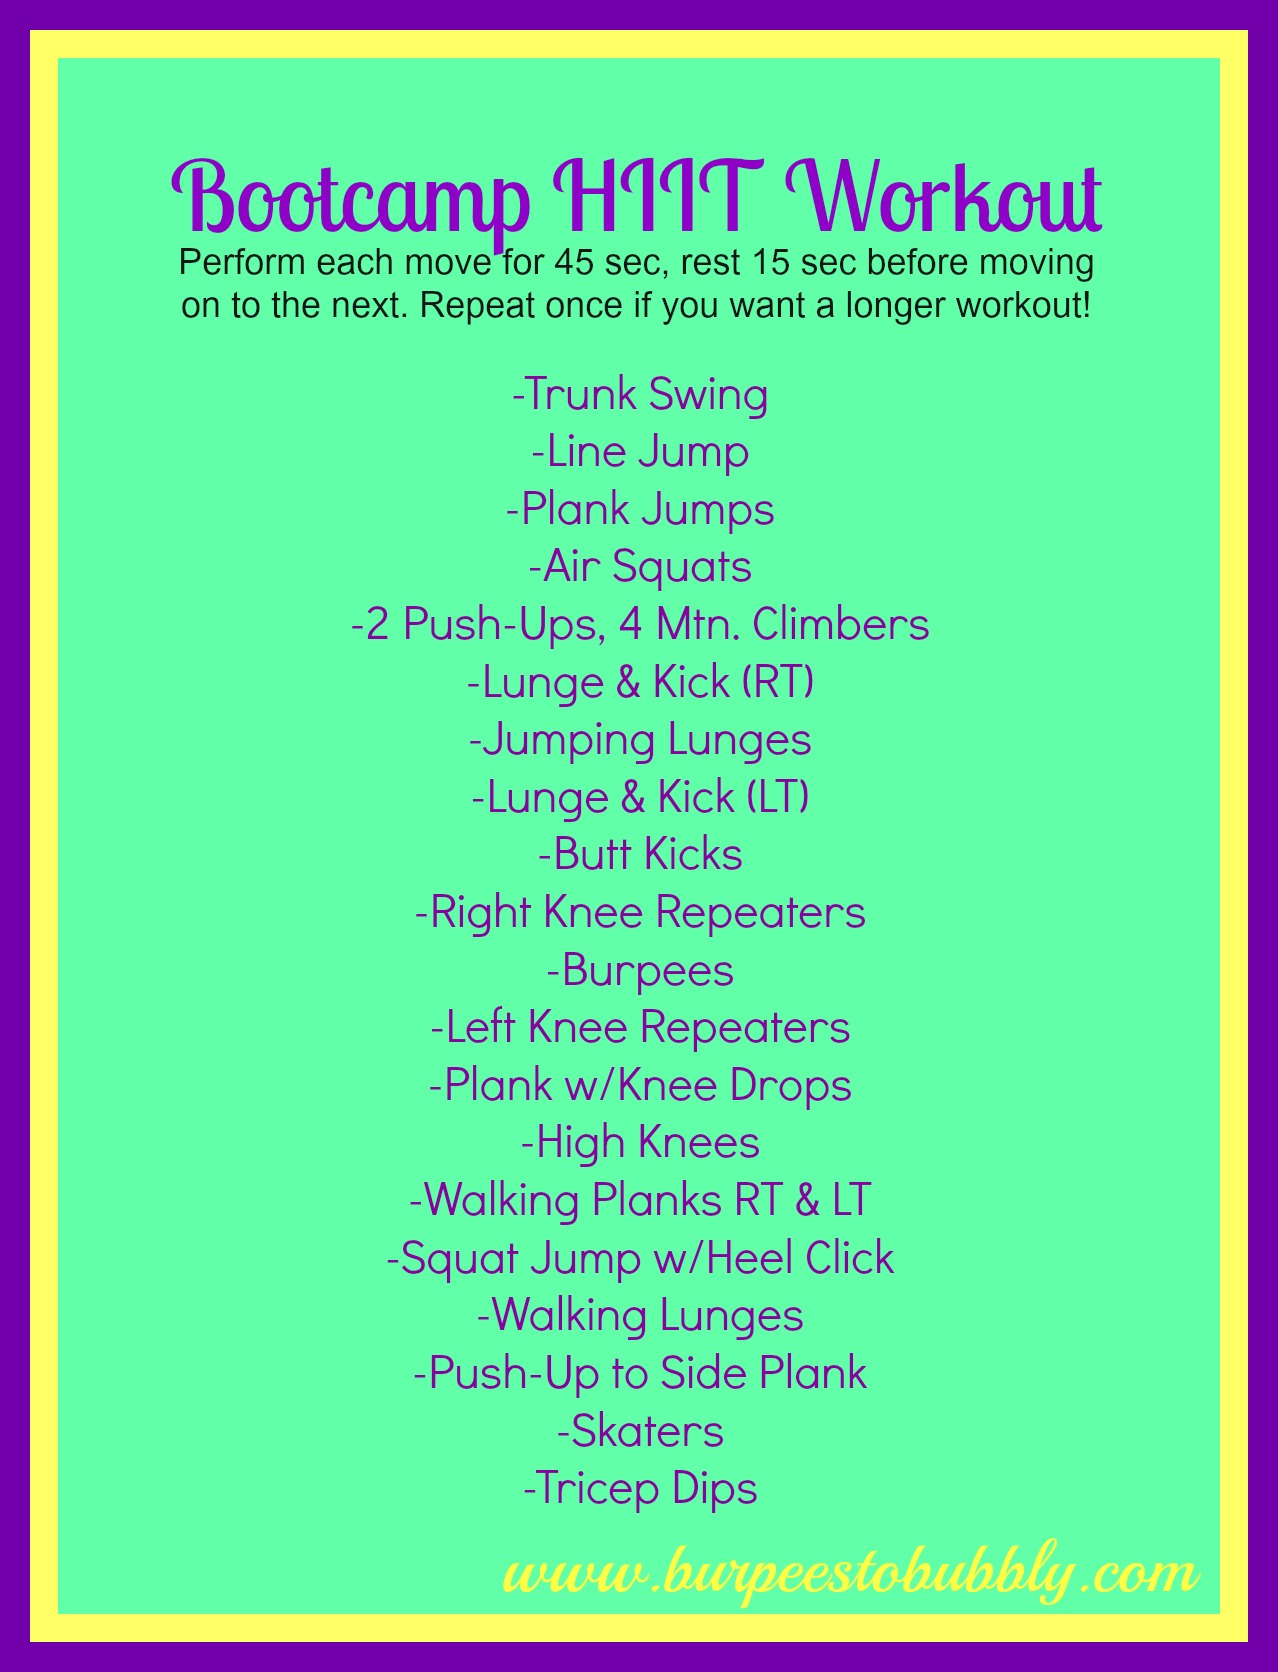 Wednesday Workout  20 Minute Bootcamp Hiit Workout